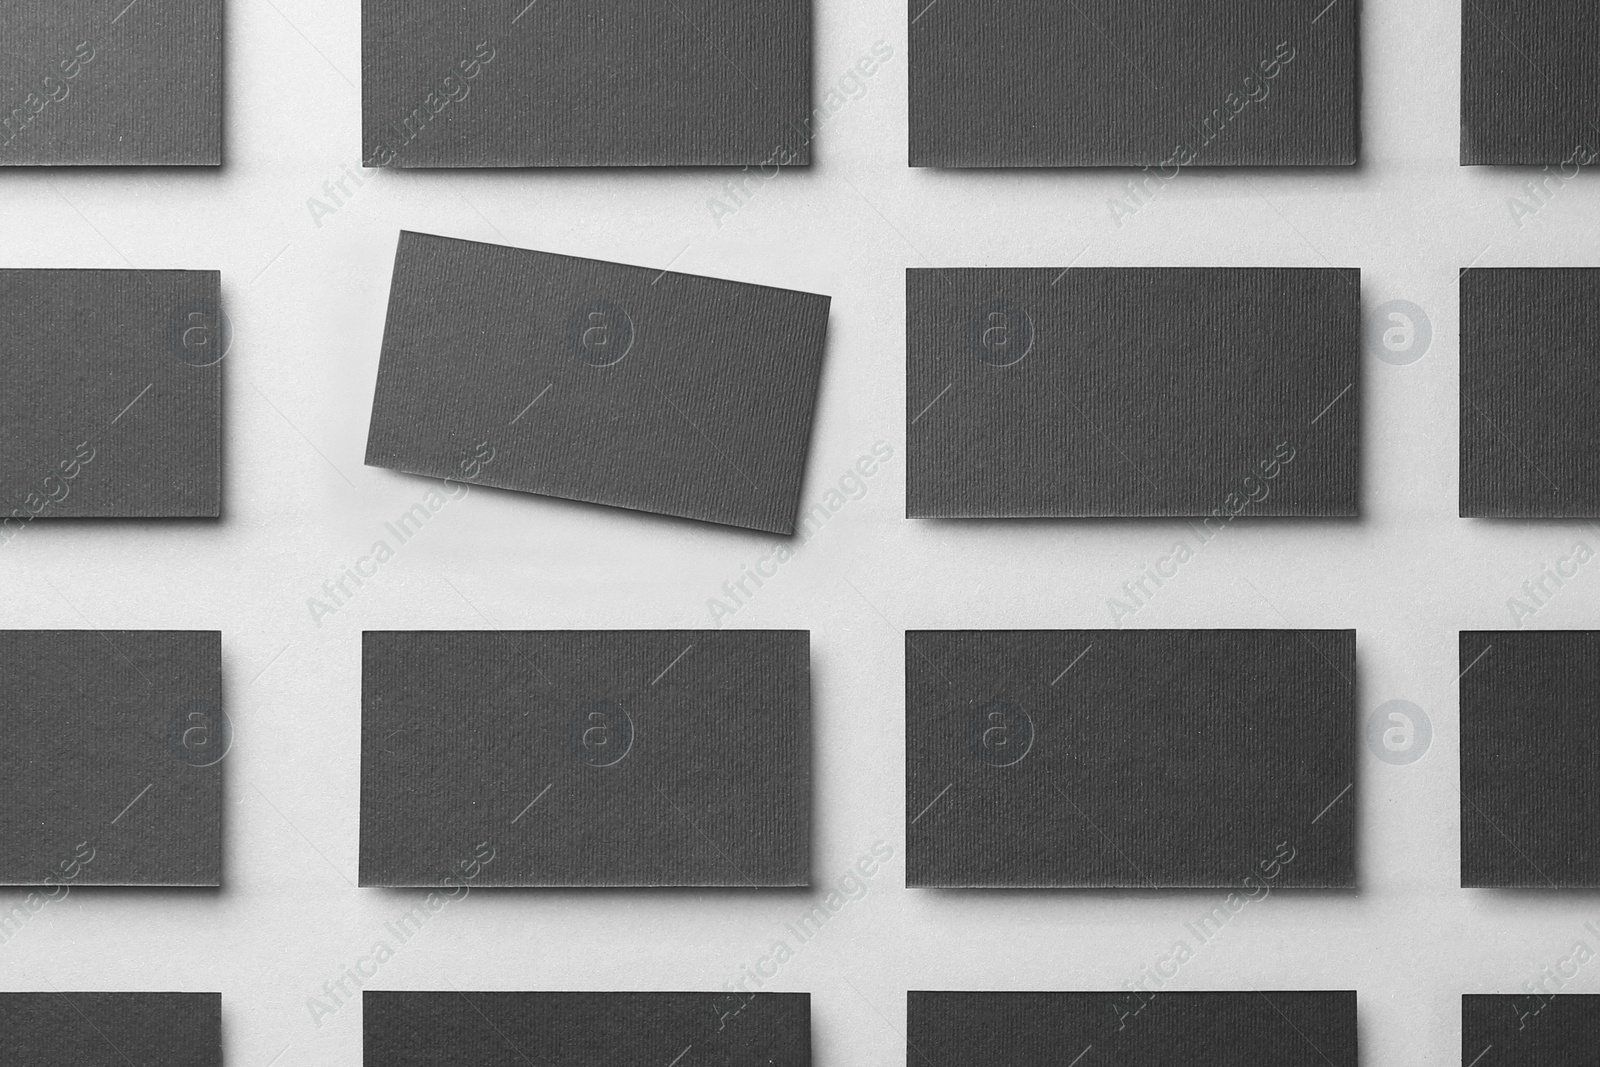 Photo of Blank black business cards on light background, flat lay. Mockup for design